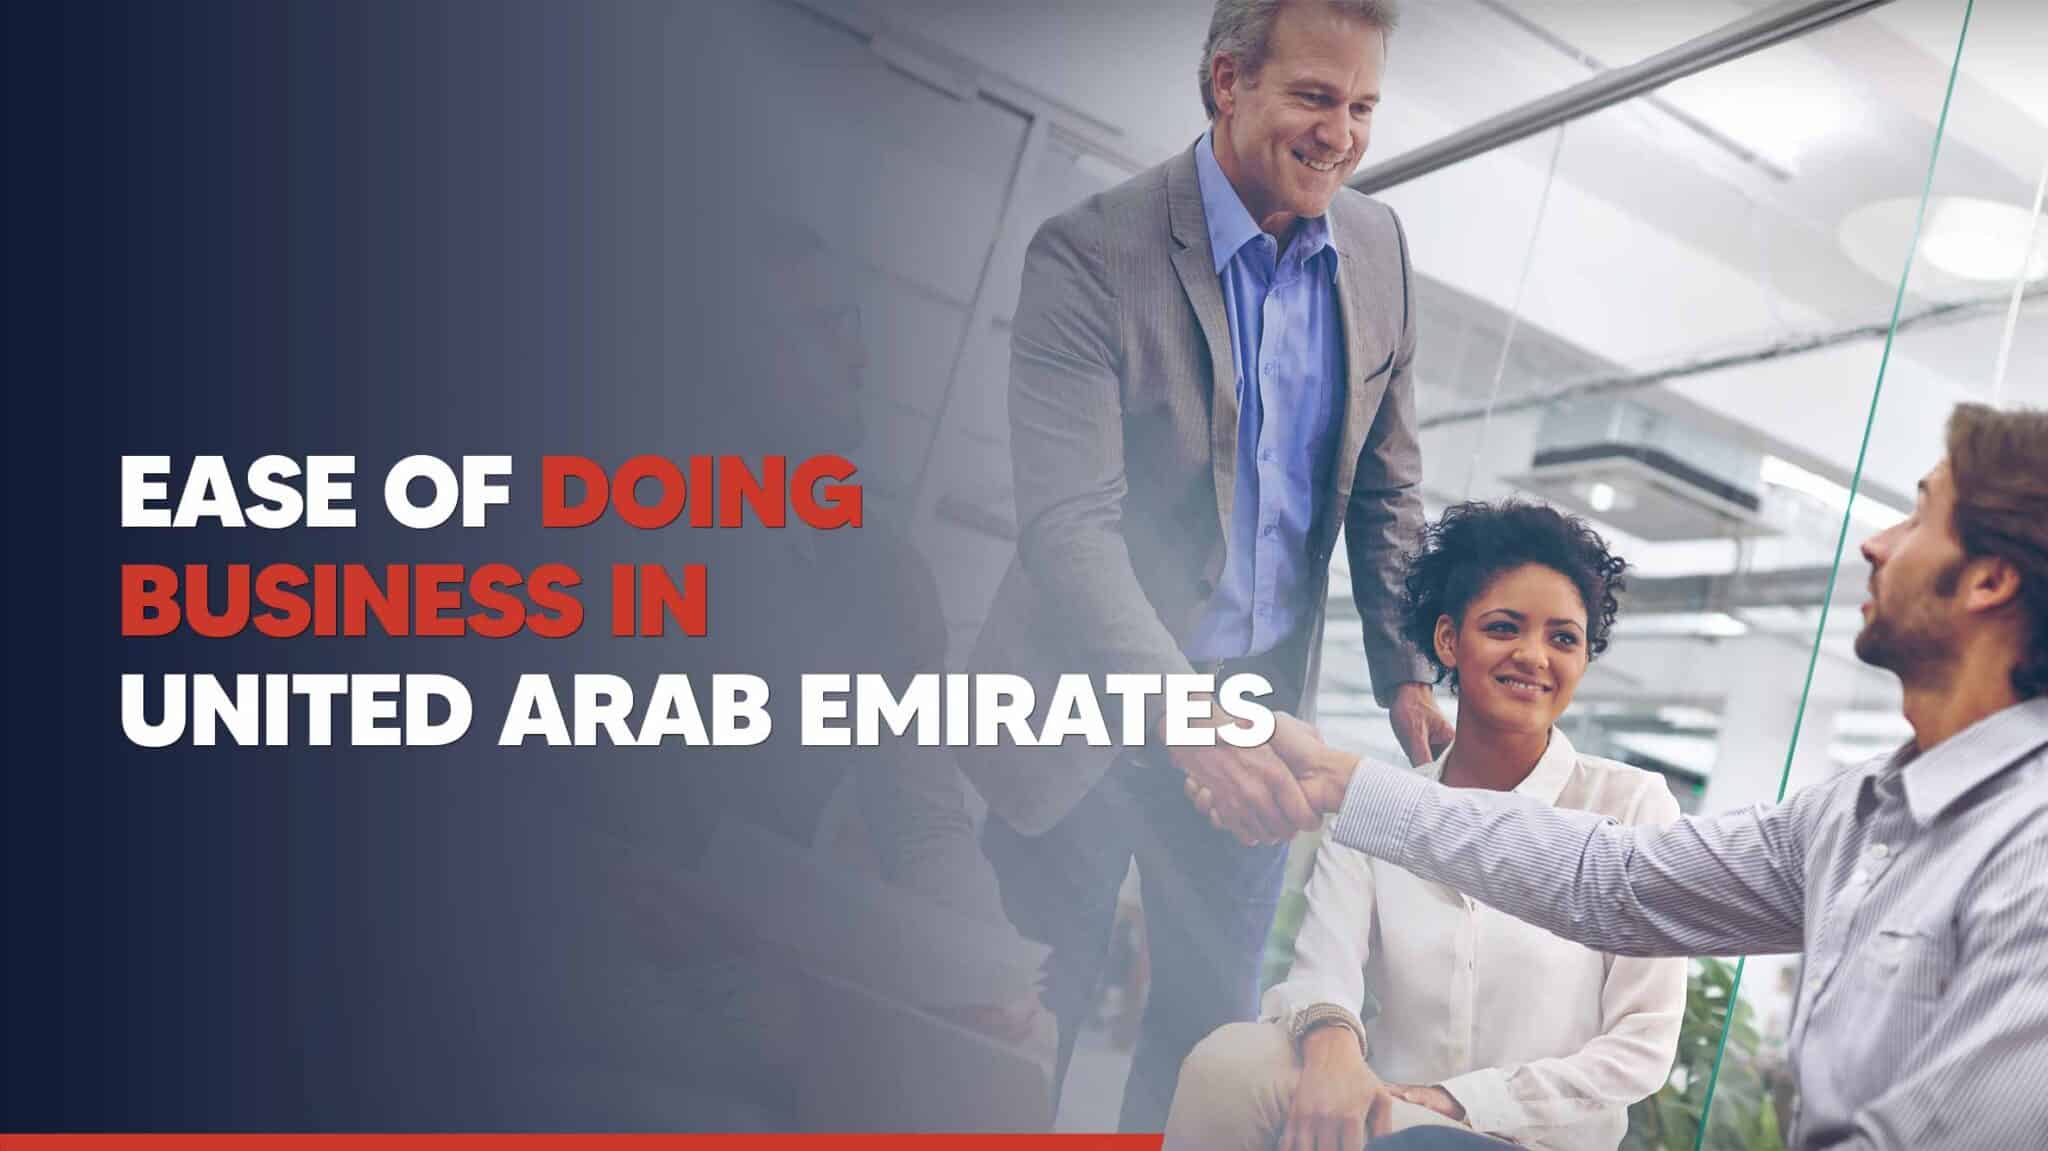 Ease of doing business in UAE